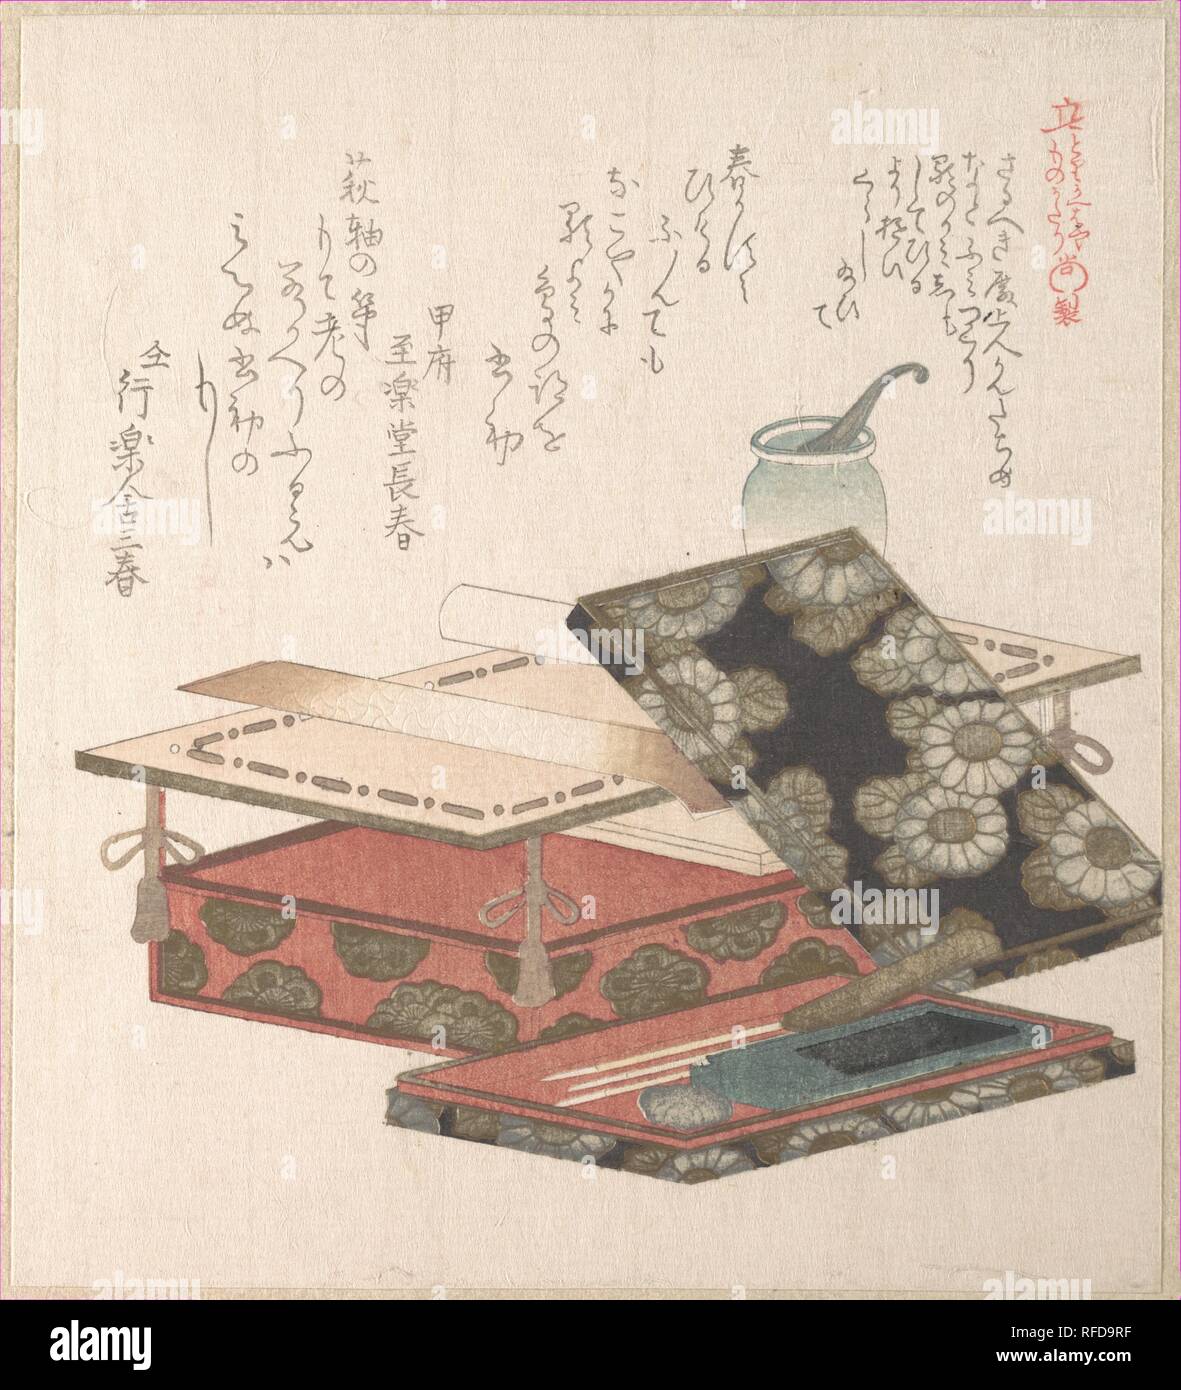 Table and Writing Set. Artist: Kubo Shunman (Japanese, 1757-1820). Culture: Japan. Dimensions: 8 3/16 x 7 1/8 in. (20.8 x 18.1 cm). Date: 19th century.  Lacquer objects are often depicted on luxurious, limited-edition New Year's greeting cards (surimono). This print shows a small, red lacquer, maki-e decorated writing table with an unbrushed poem card (tanzaku) placed on it. Next to the table is a lacquer writing box. On the outside, it is decorated with gold and silver chrysanthemum maki-e, while the inside is red lacquer. It contains an inkstone, a water-dropper, an ink stick, and three brus Stock Photo